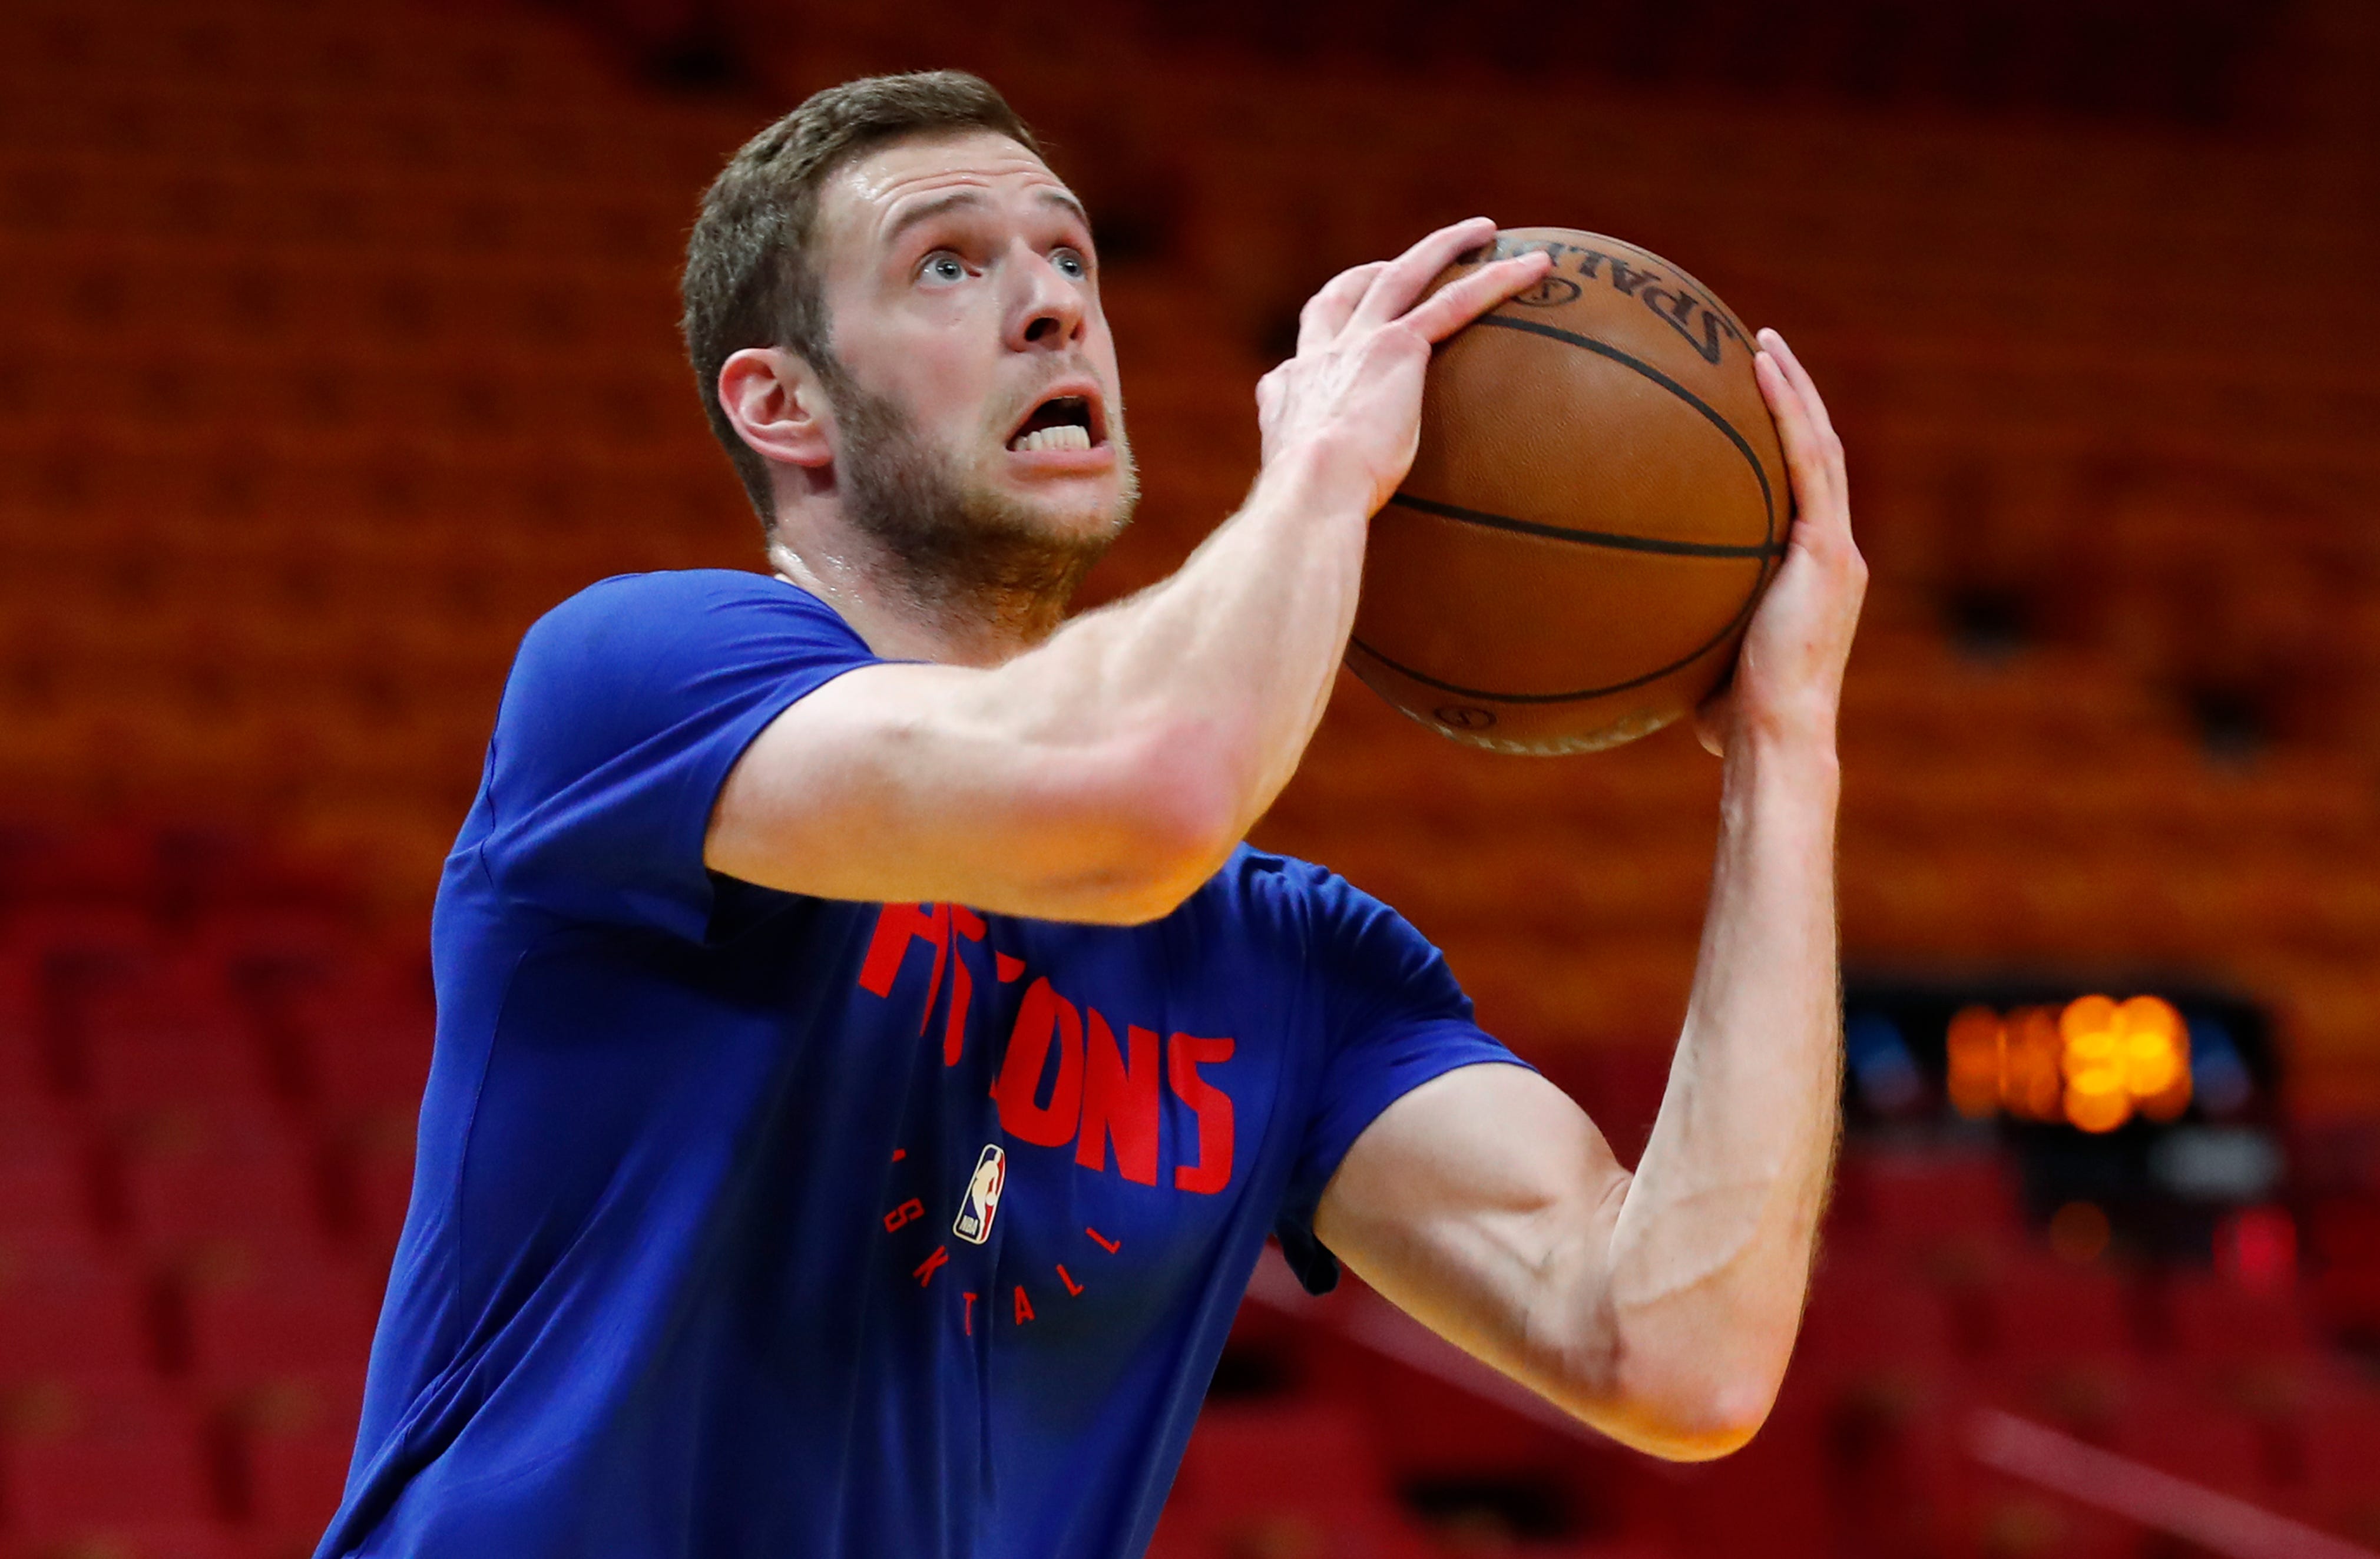 Detroit Pistons forward Jon Leuer warms up before the start of an NBA basketball game against the Miami Heat.